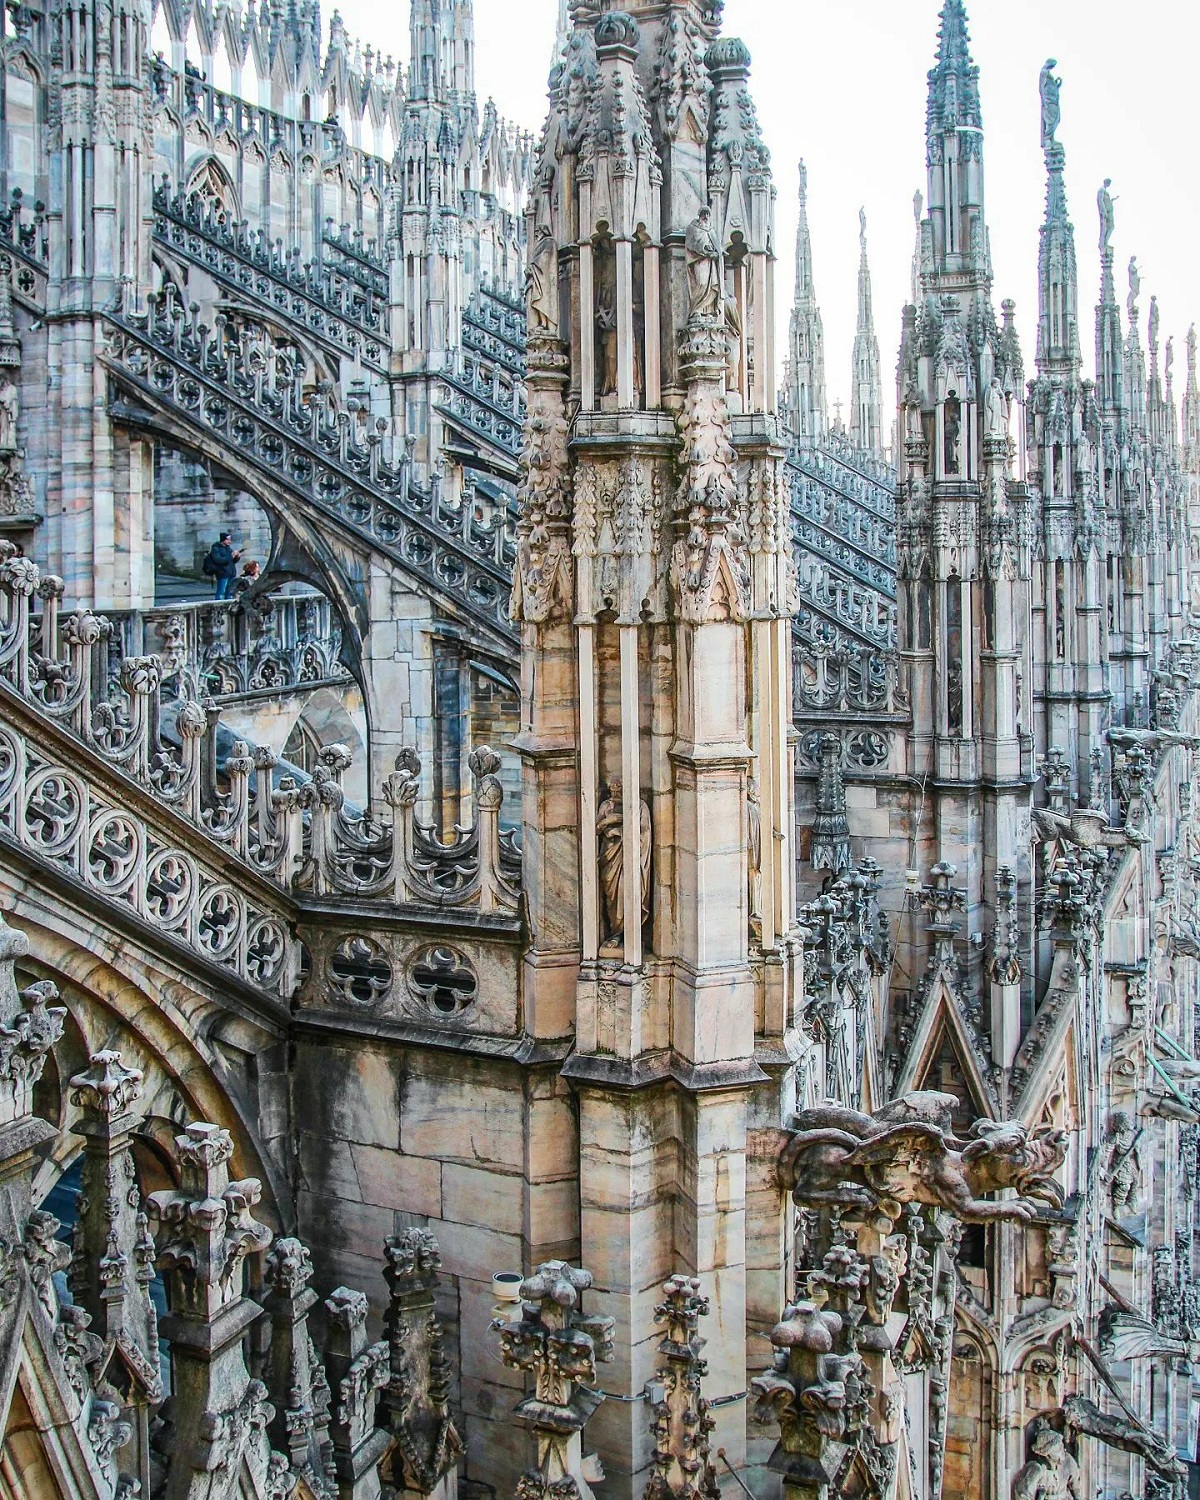 Pinnacles And Spires On The Flying Buttresses Adorned With Statues And Stone Carvings, Milan Cathedral, Milan, Lombardy, Italy